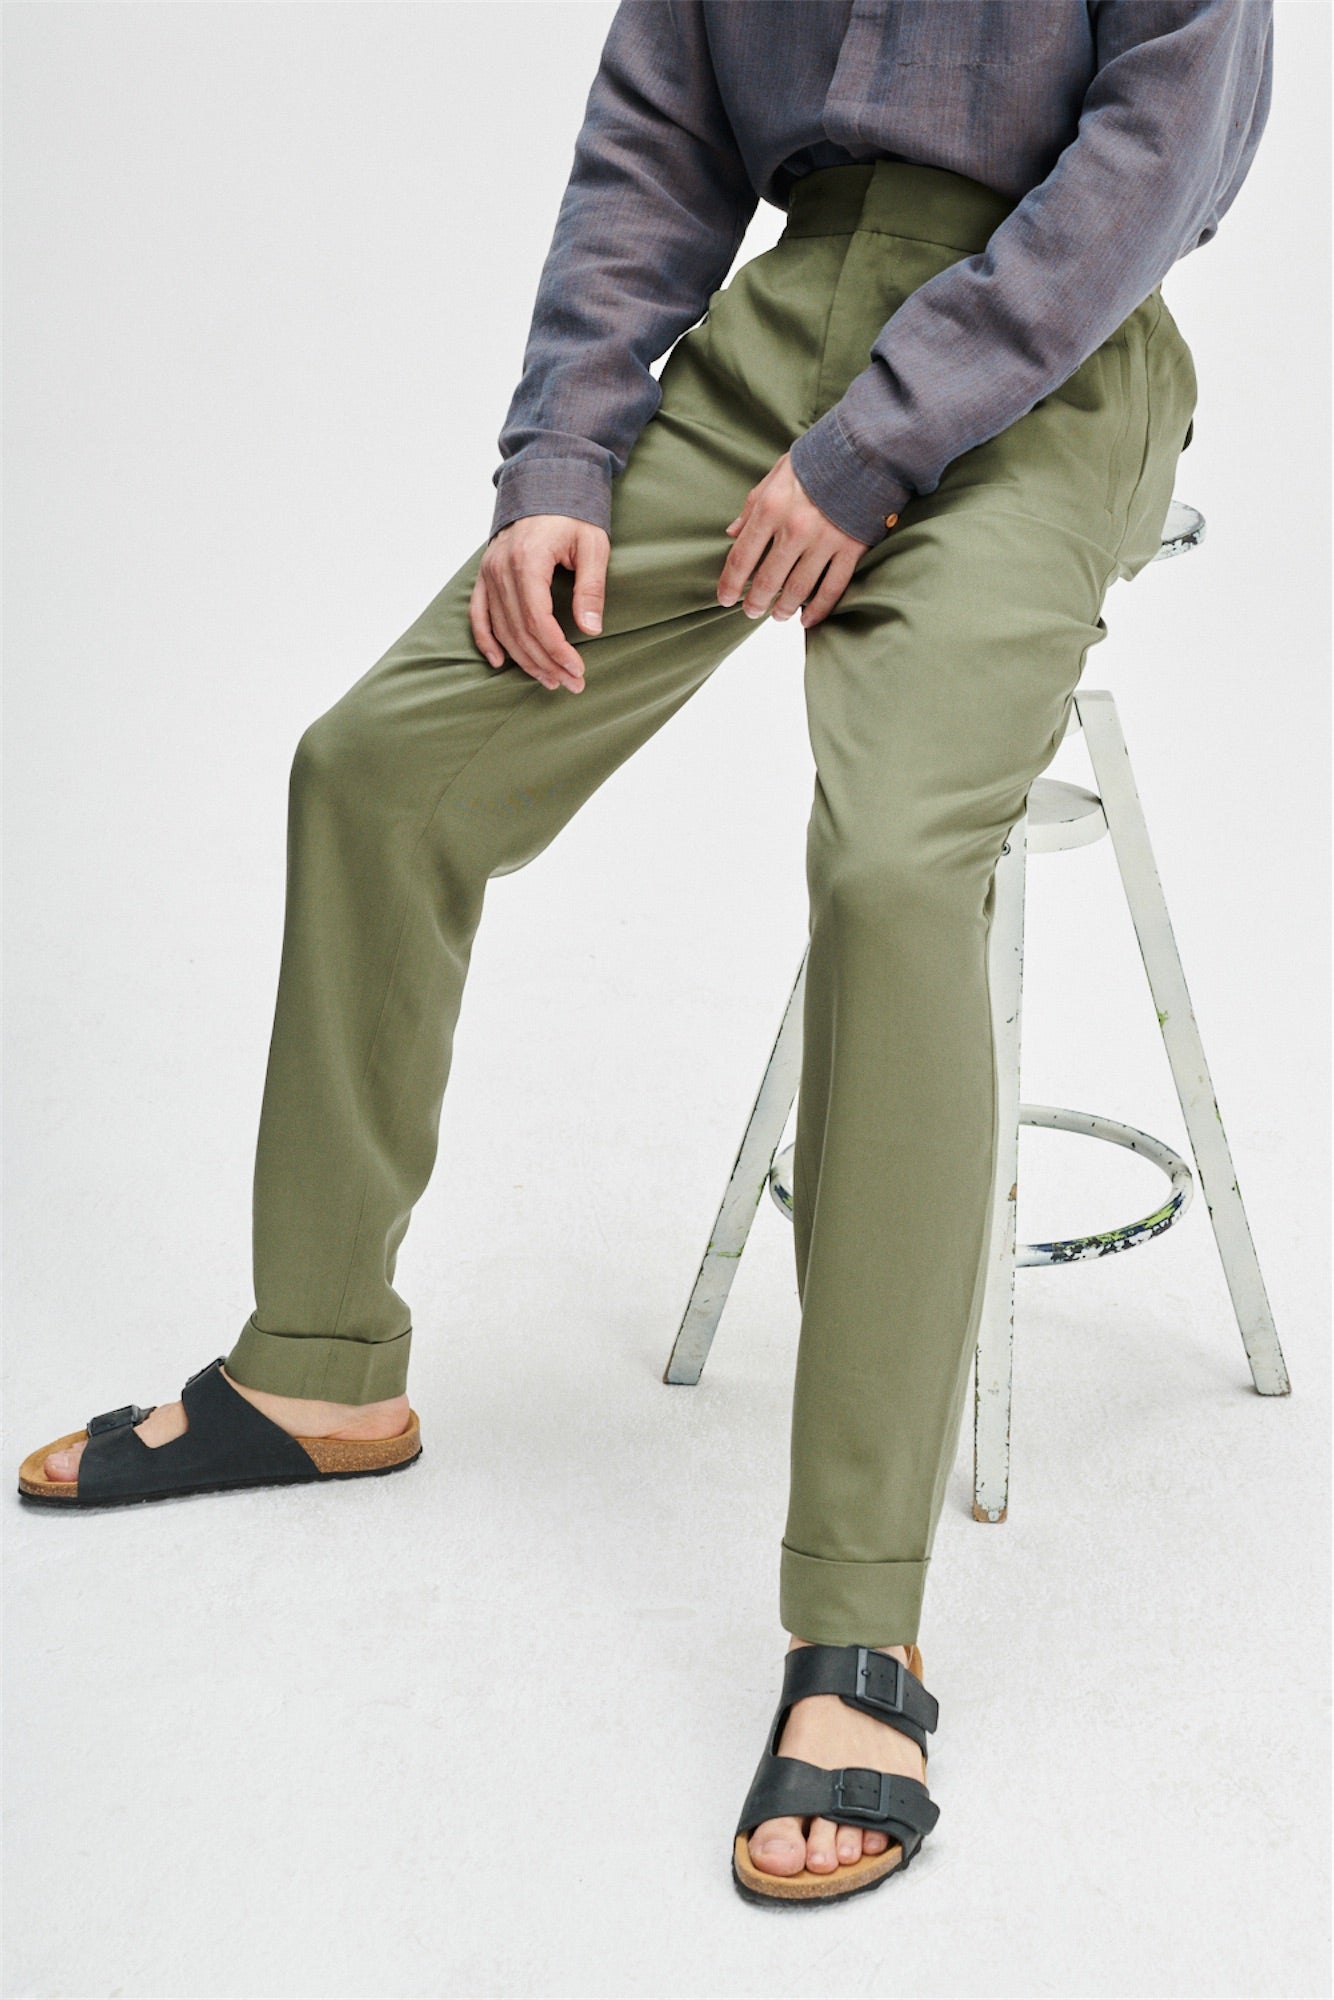 Garden Trousers in an Olive Green Sustainable Smooth and Soft 